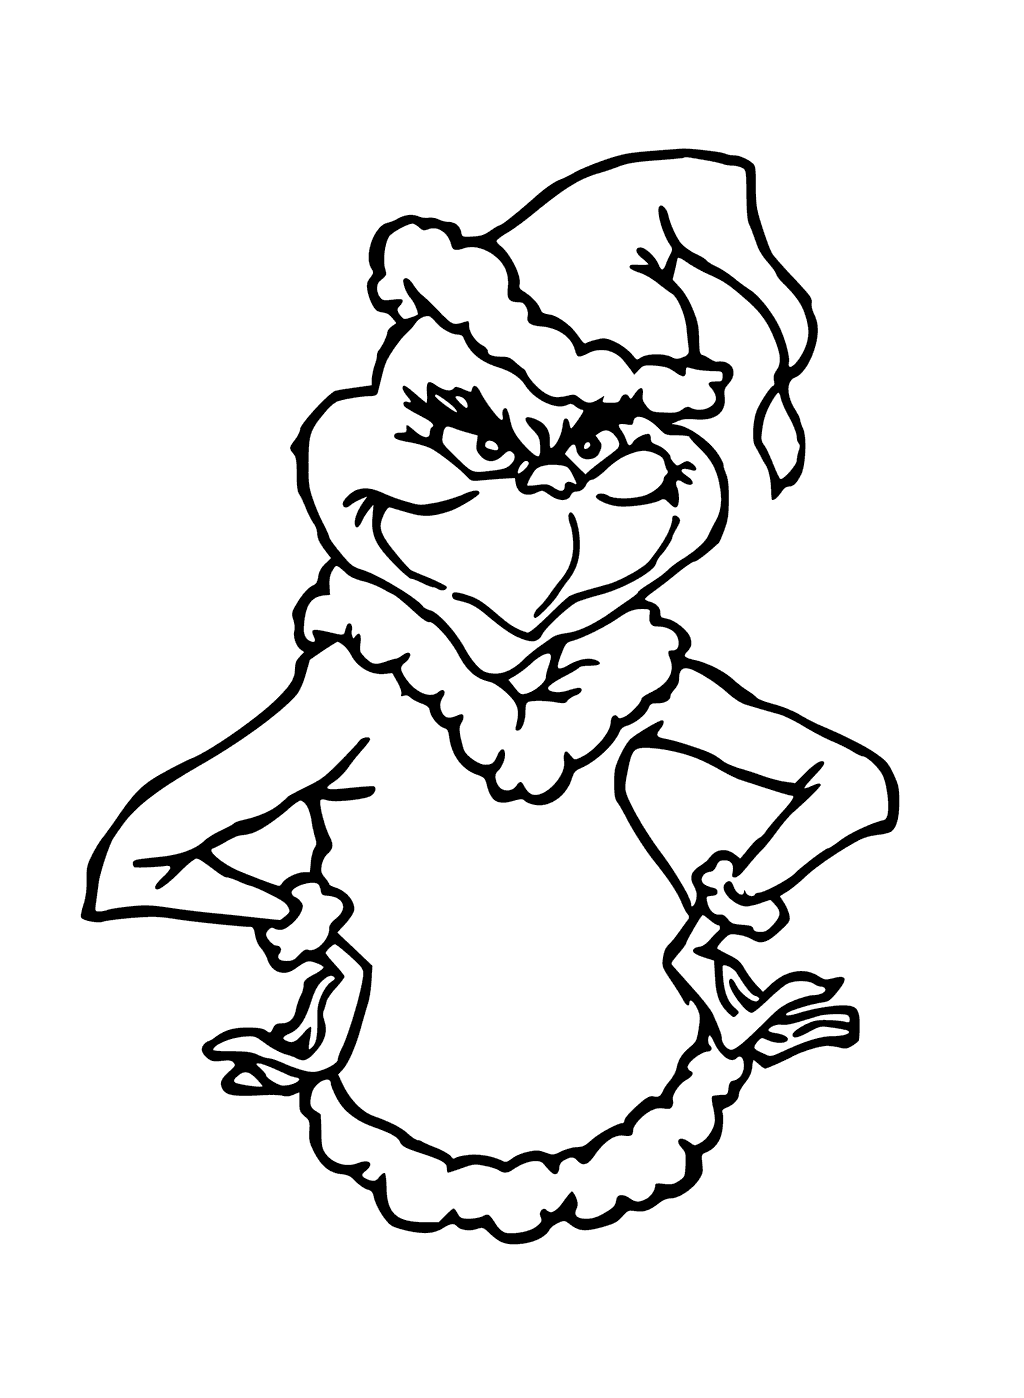 The Grinch in action coloring page